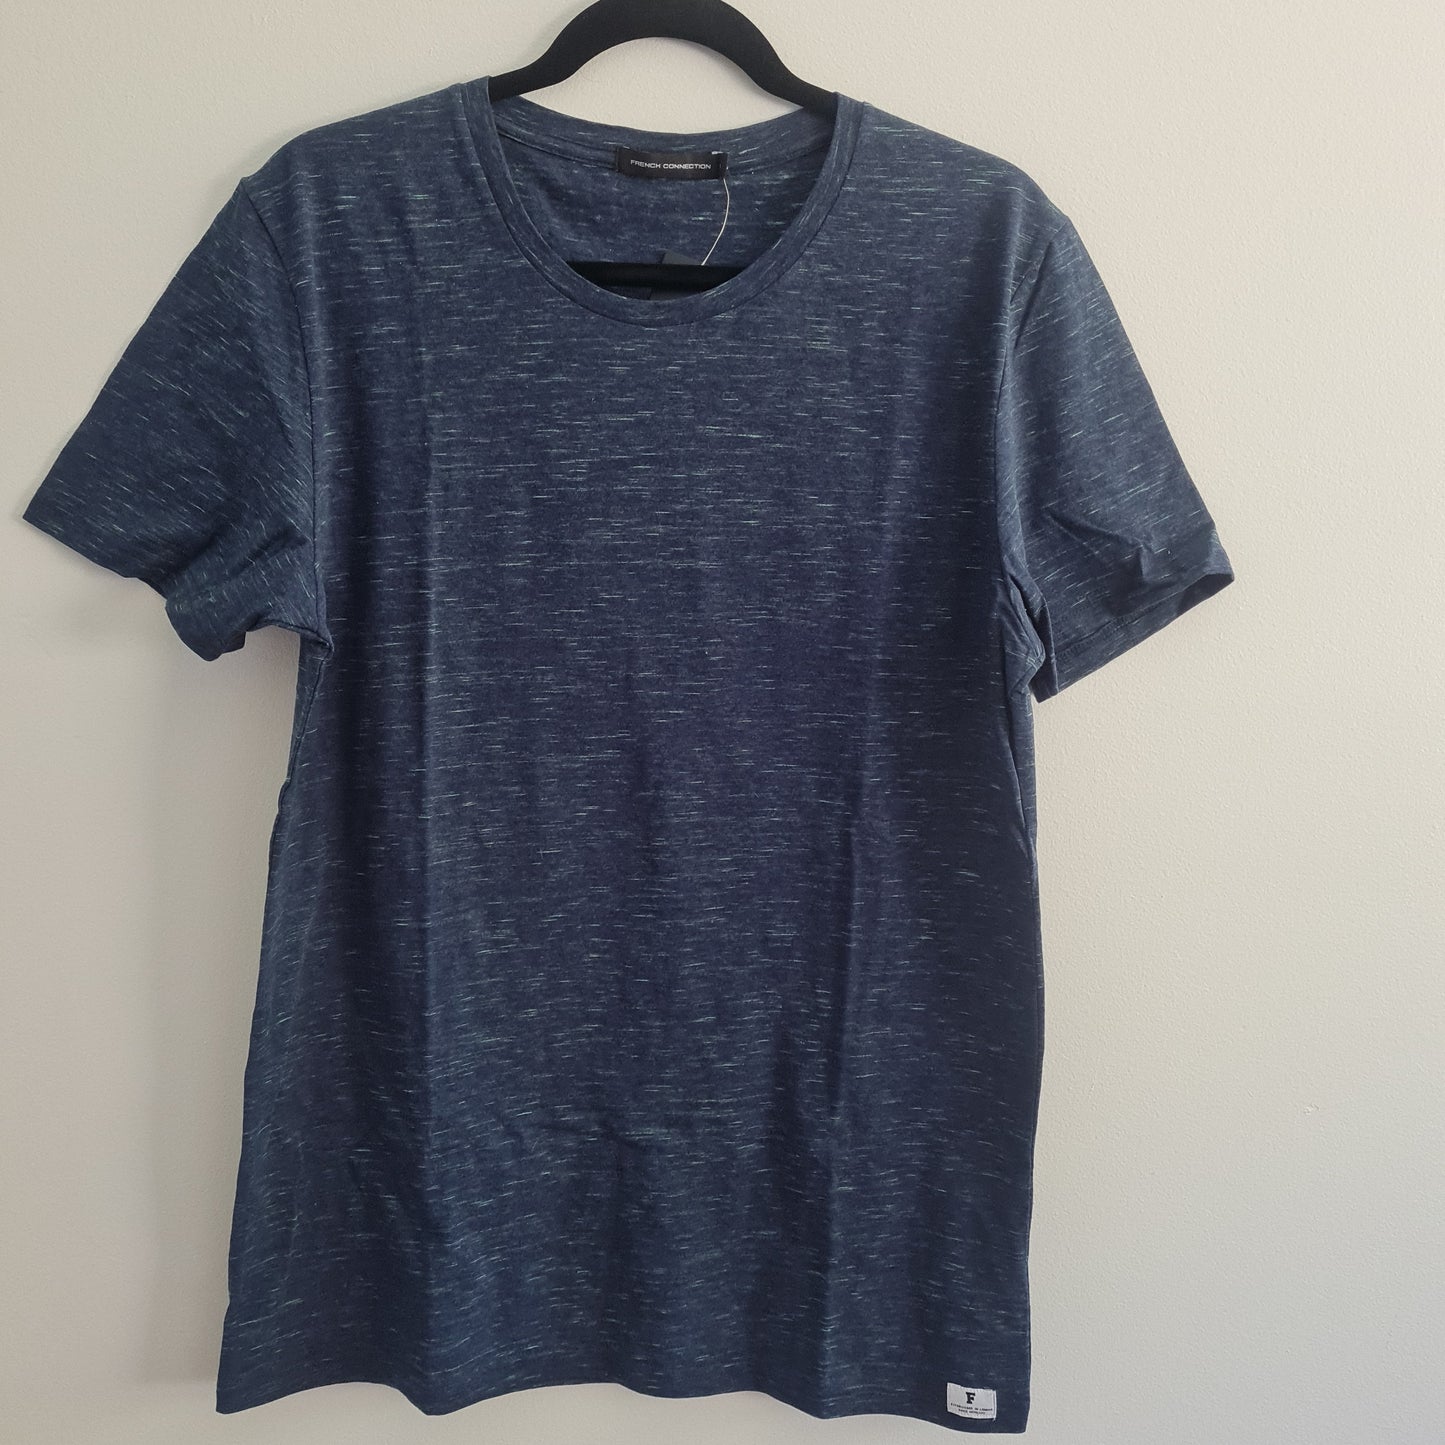 French Connection Indigo T-Shirt Size L